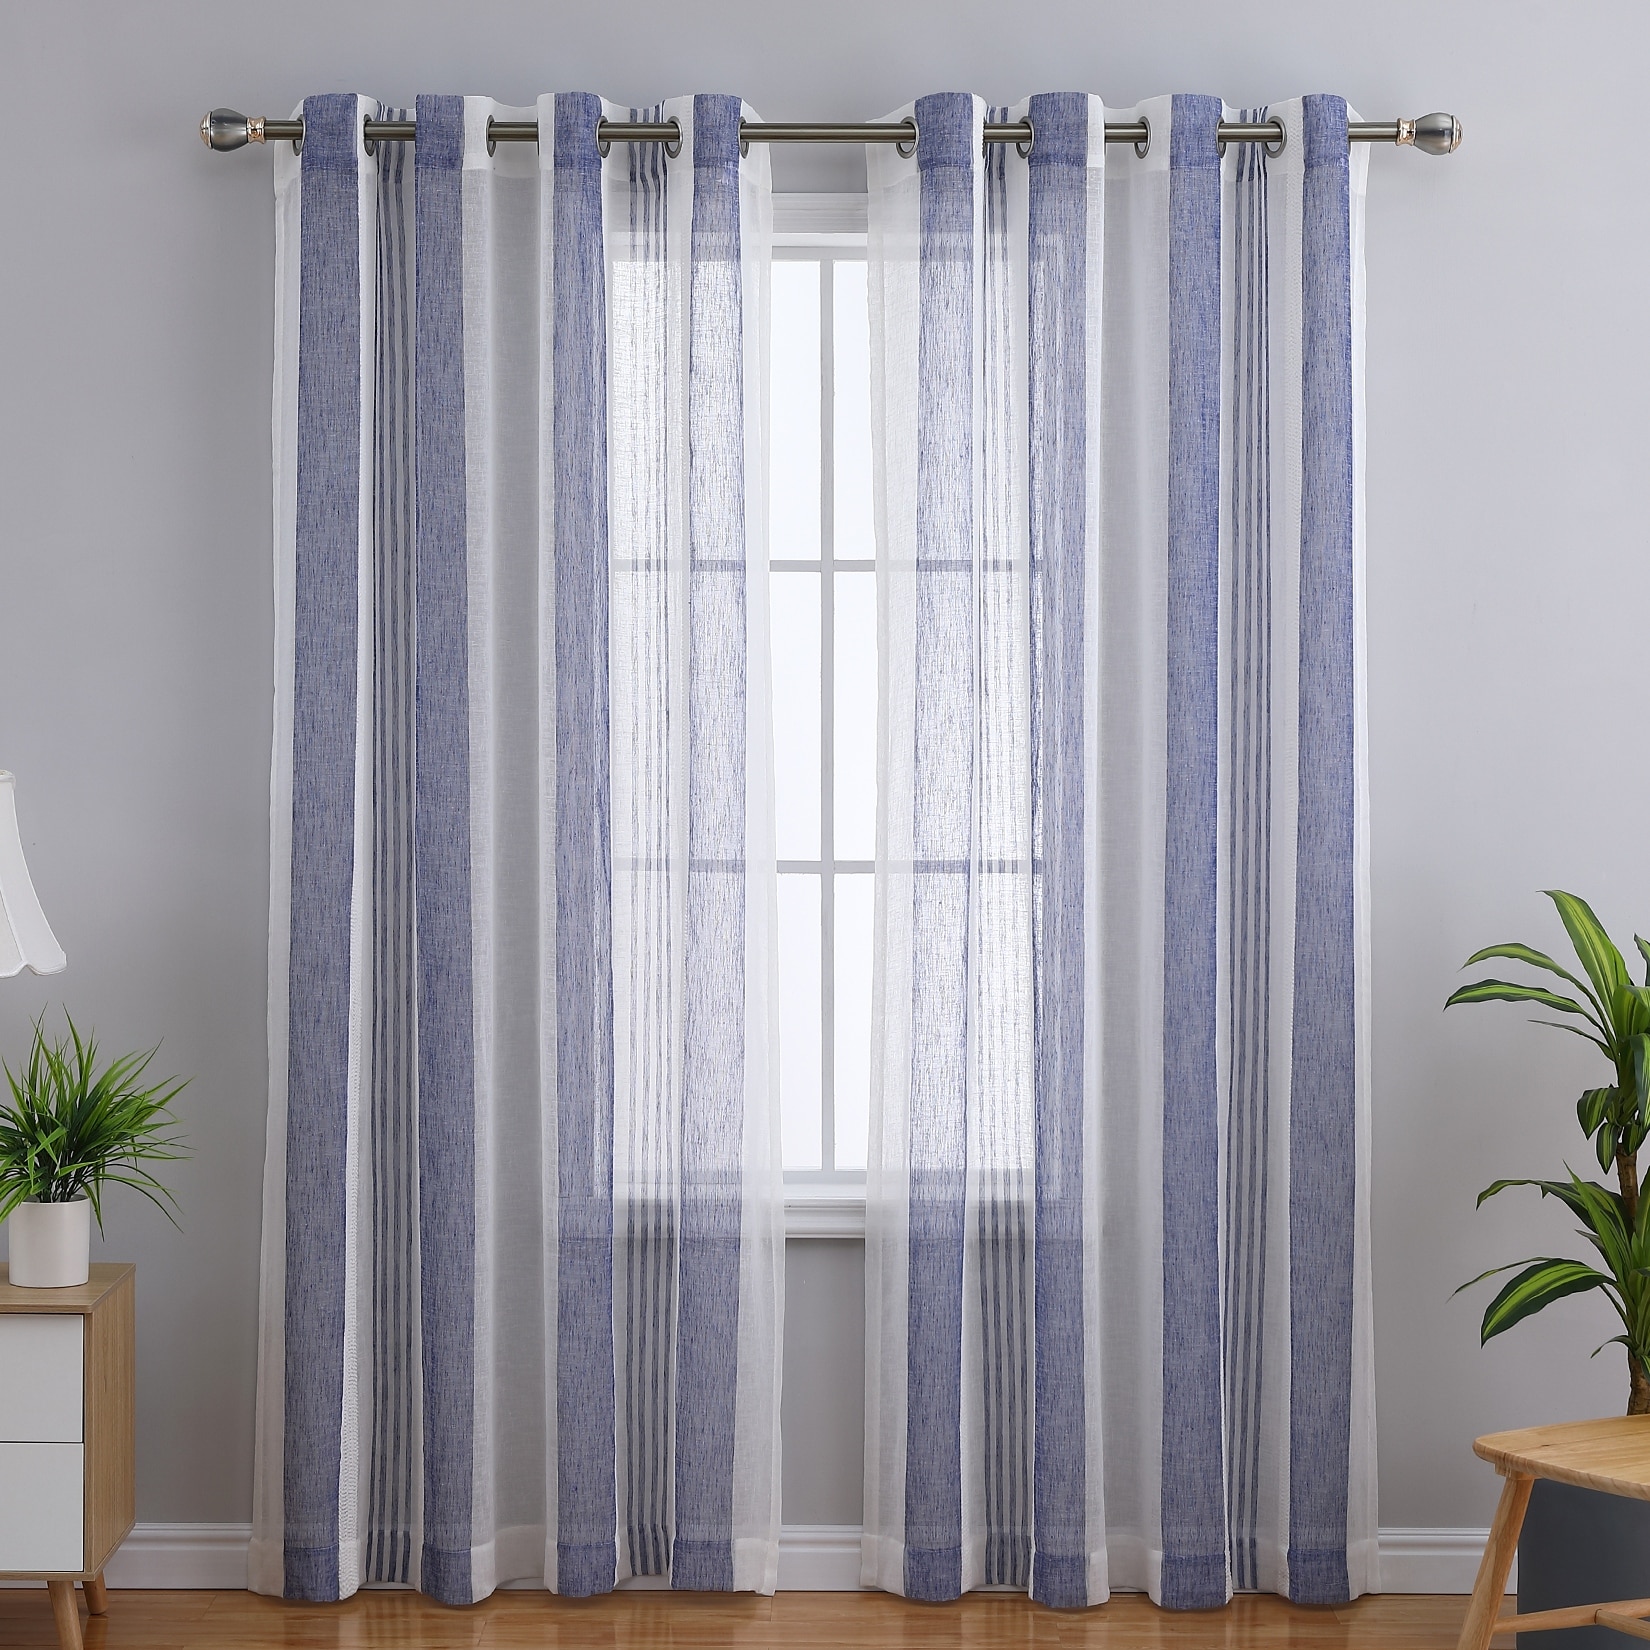 Grommet, Stripe, 63 Inches Curtains - Bed Bath & Beyond